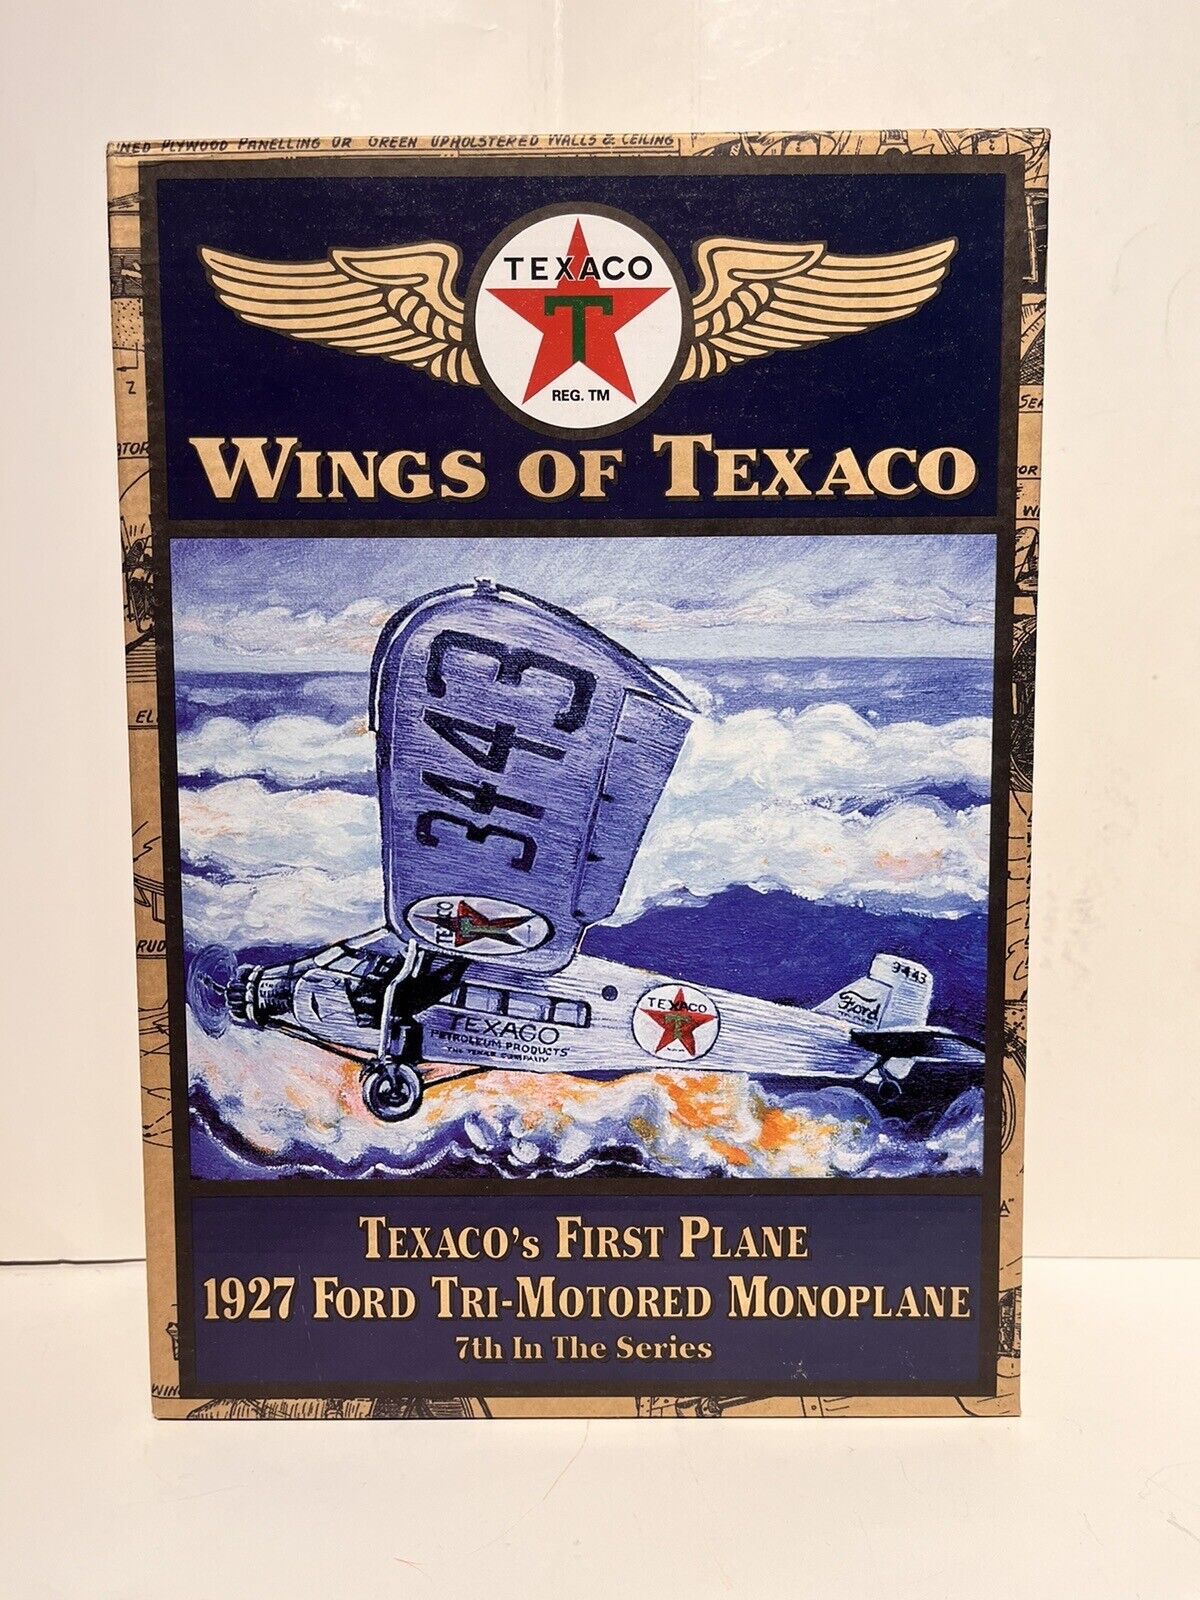 Ertl Texaco Wings of Texaco 1927 Ford Tri-Motored Monoplane 7th In The Series